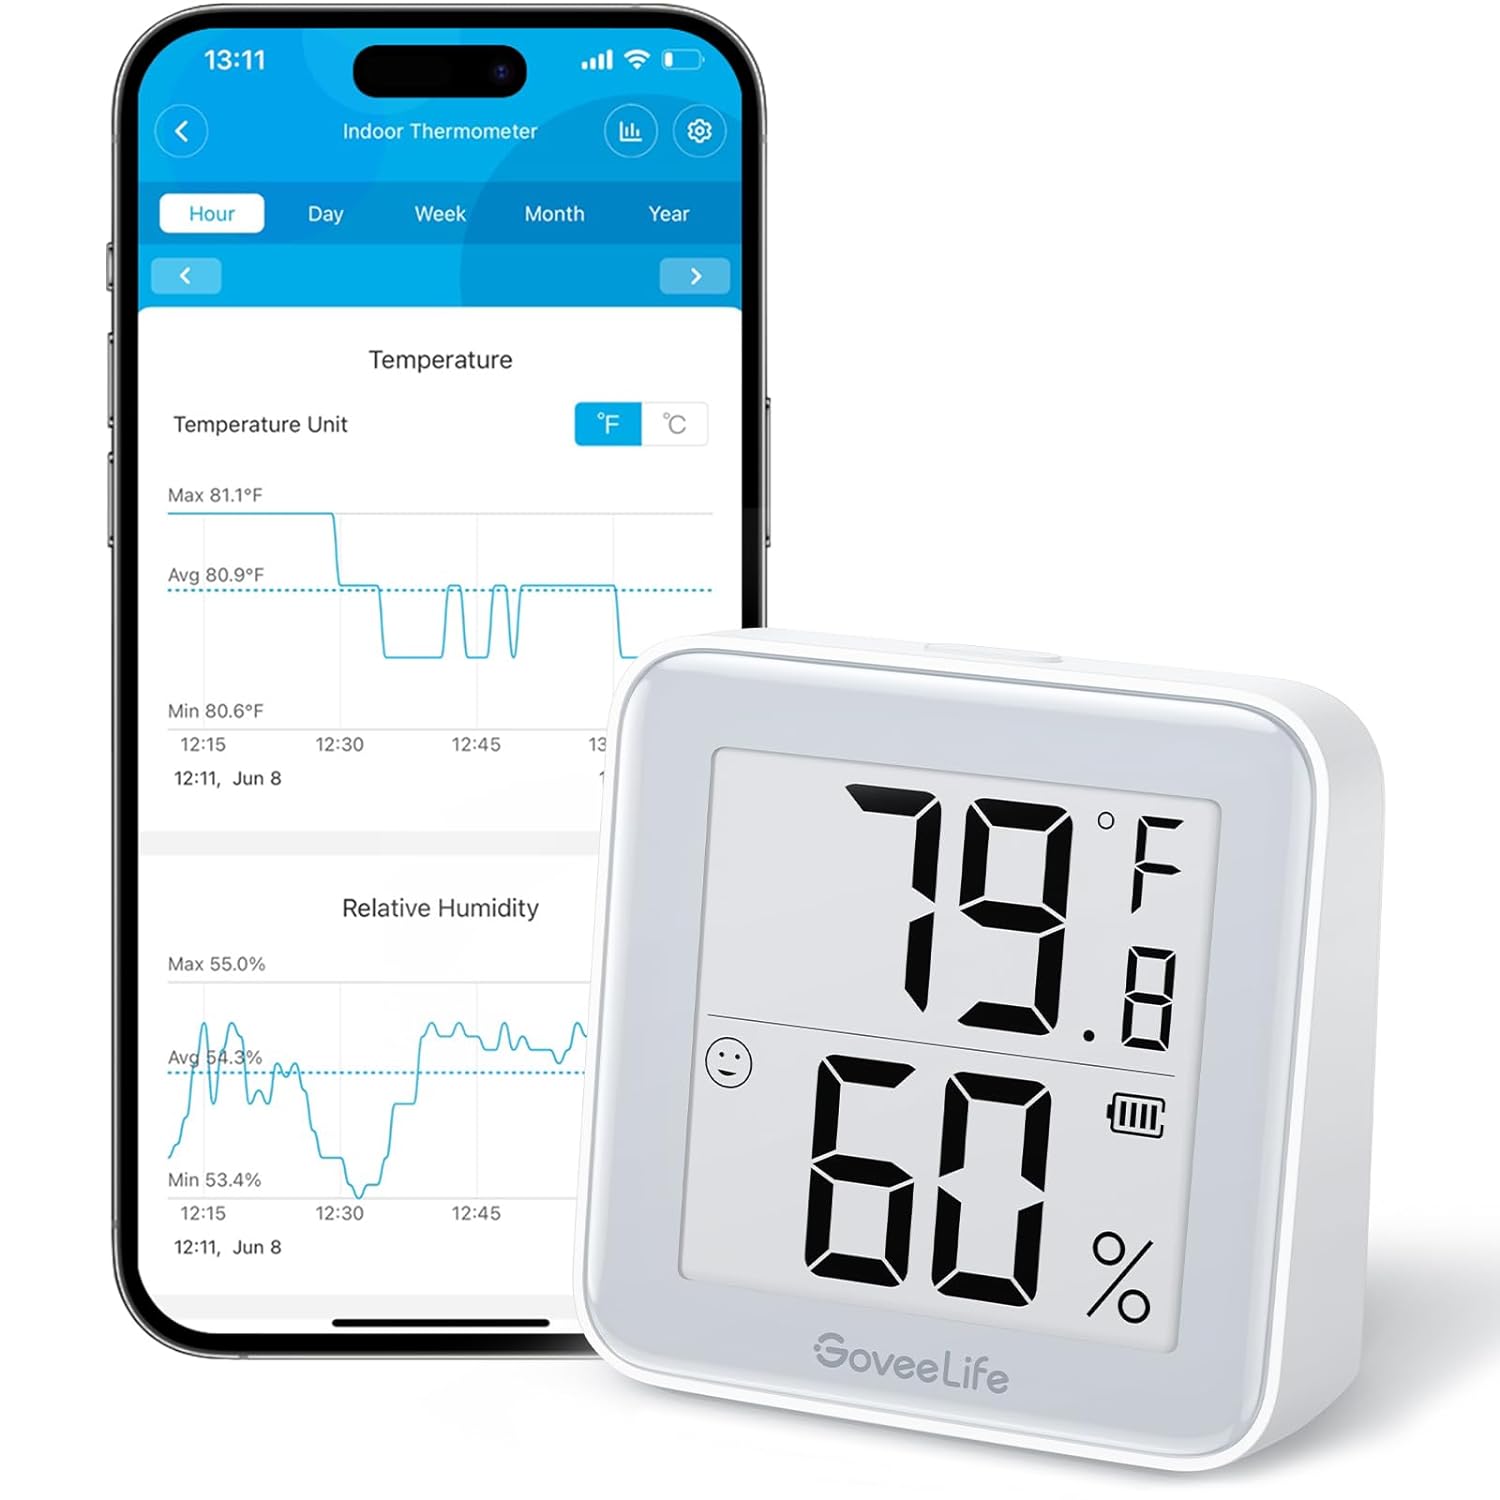 GoveeLife E-Ink Bluetooth Thermometer Hygrometer, Smart Digital Indoor Wireless Temperature Humidity Sensor with Alert, Free Data Storage Export, for Home Room Greenhouse Wall, 1 Pcak (with Battery)